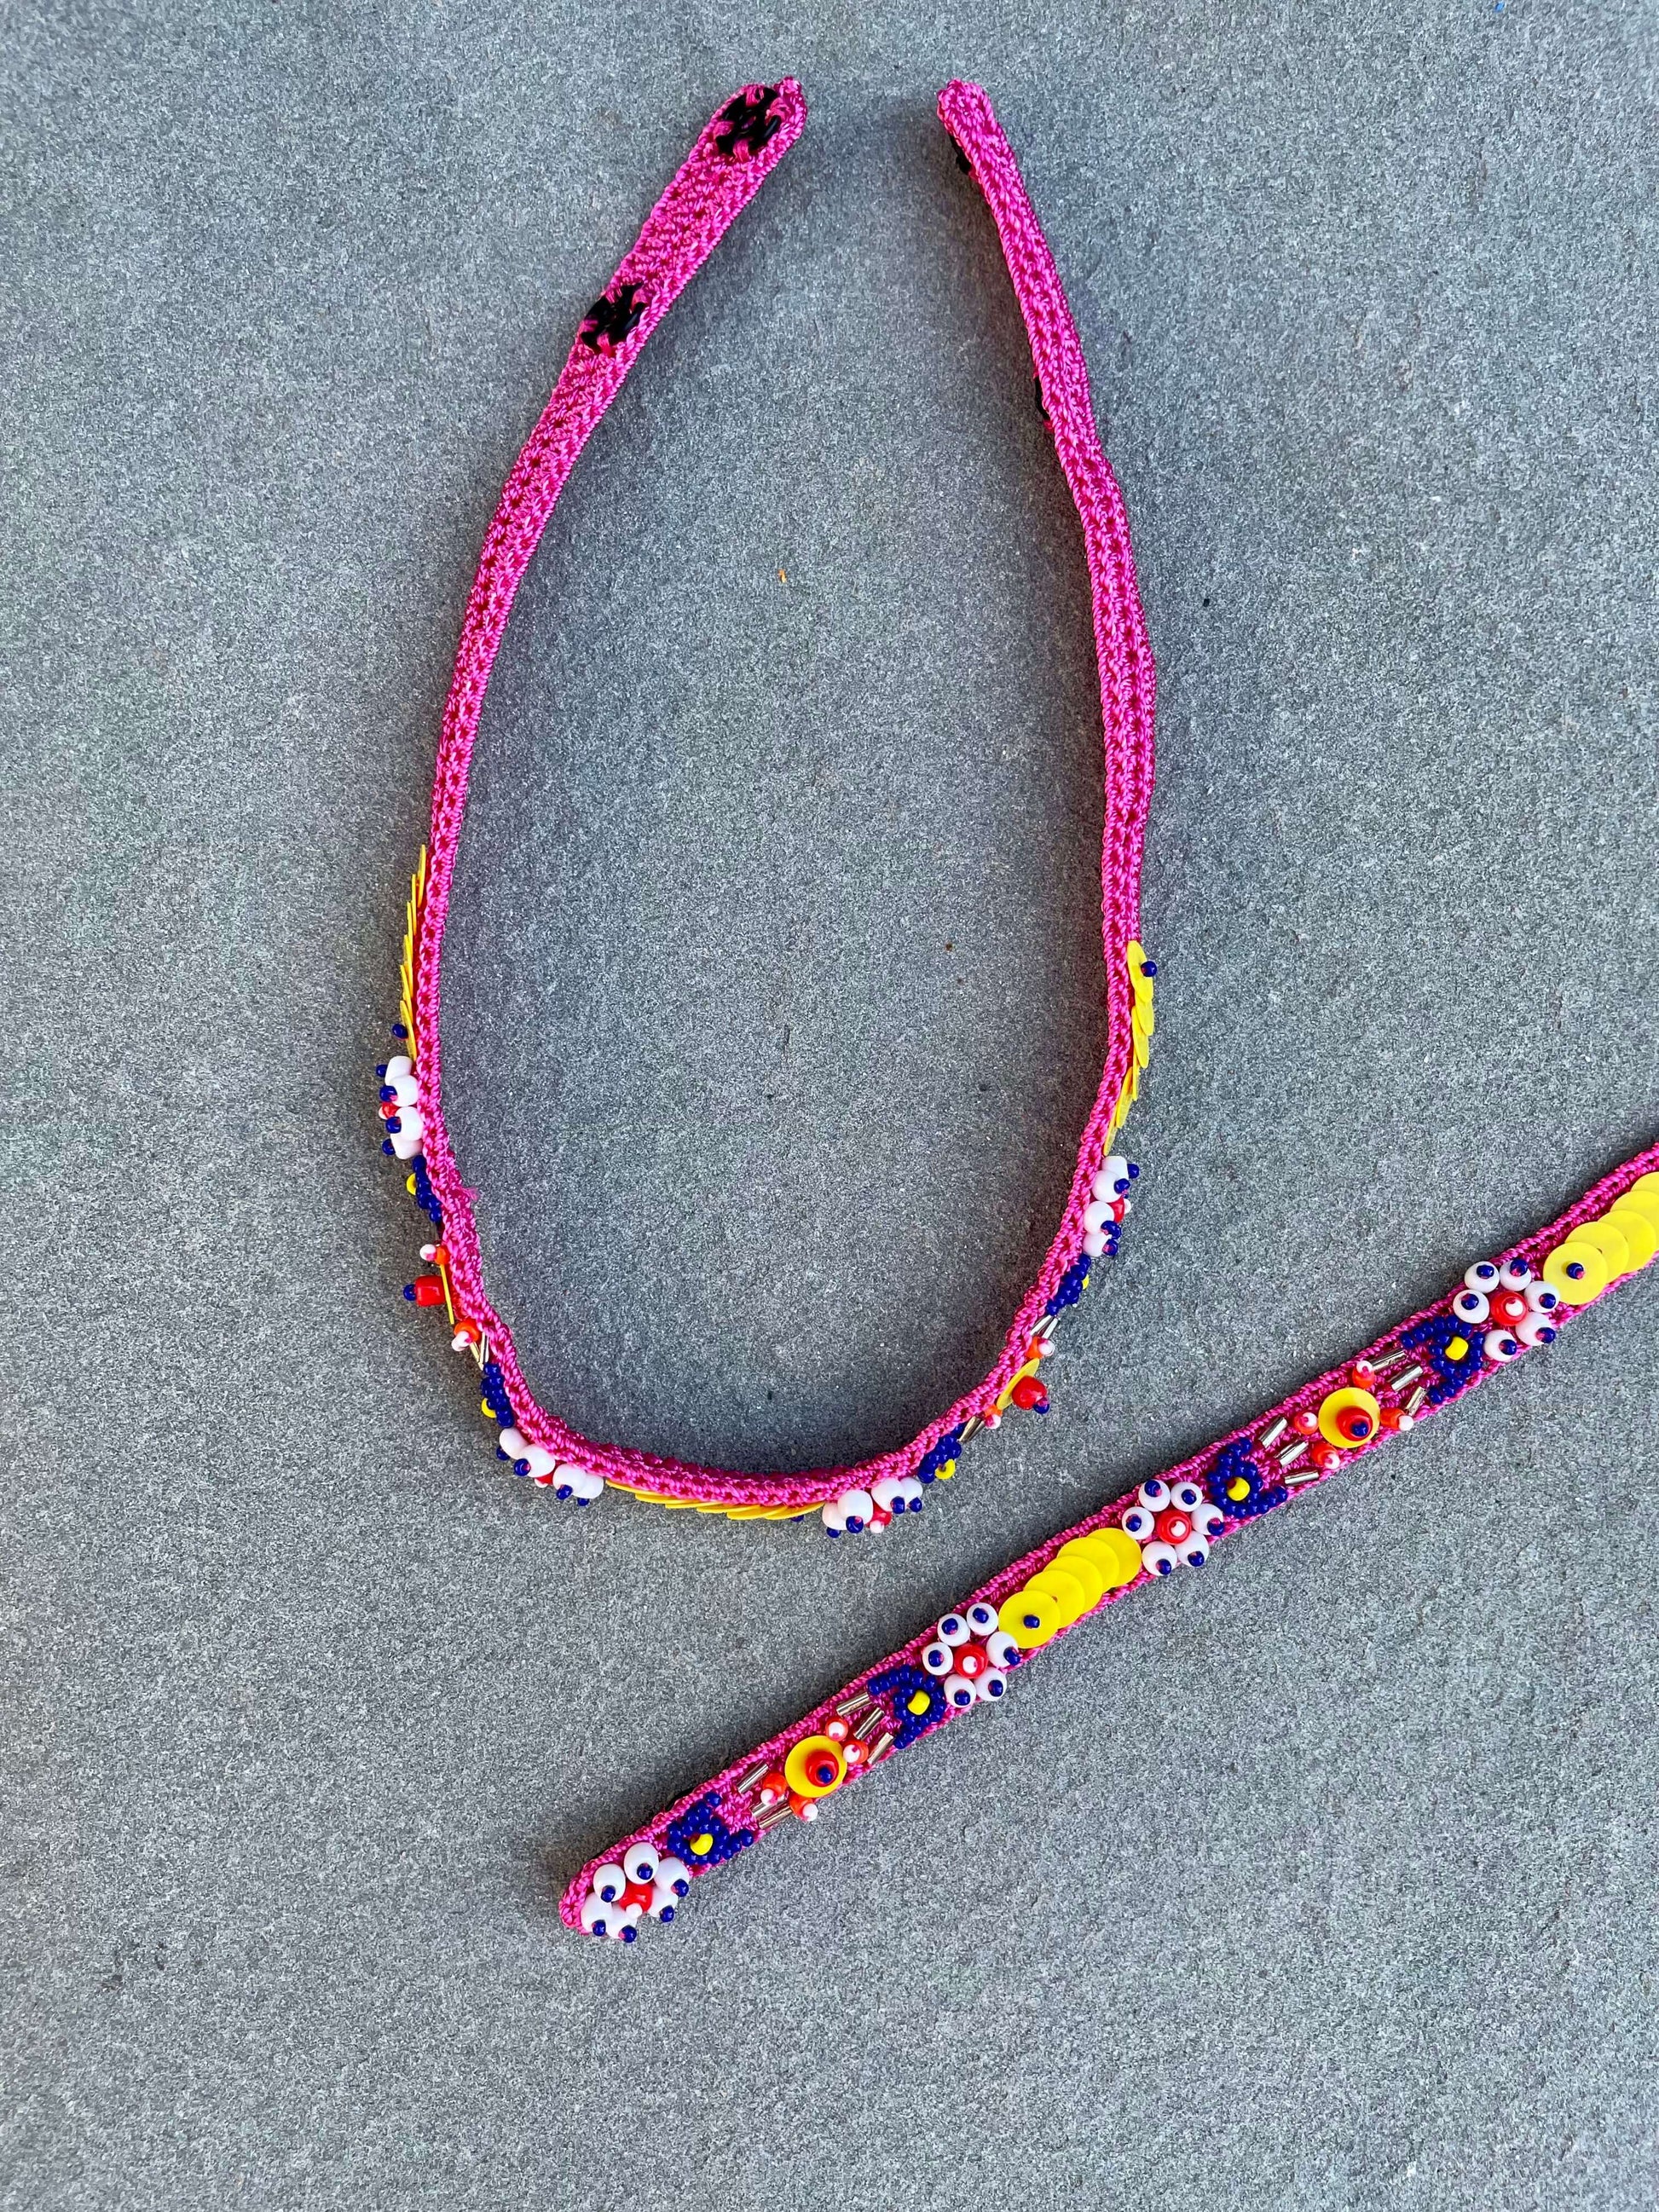 Floral Bead Embroidery Bracelet and Choker in Pink